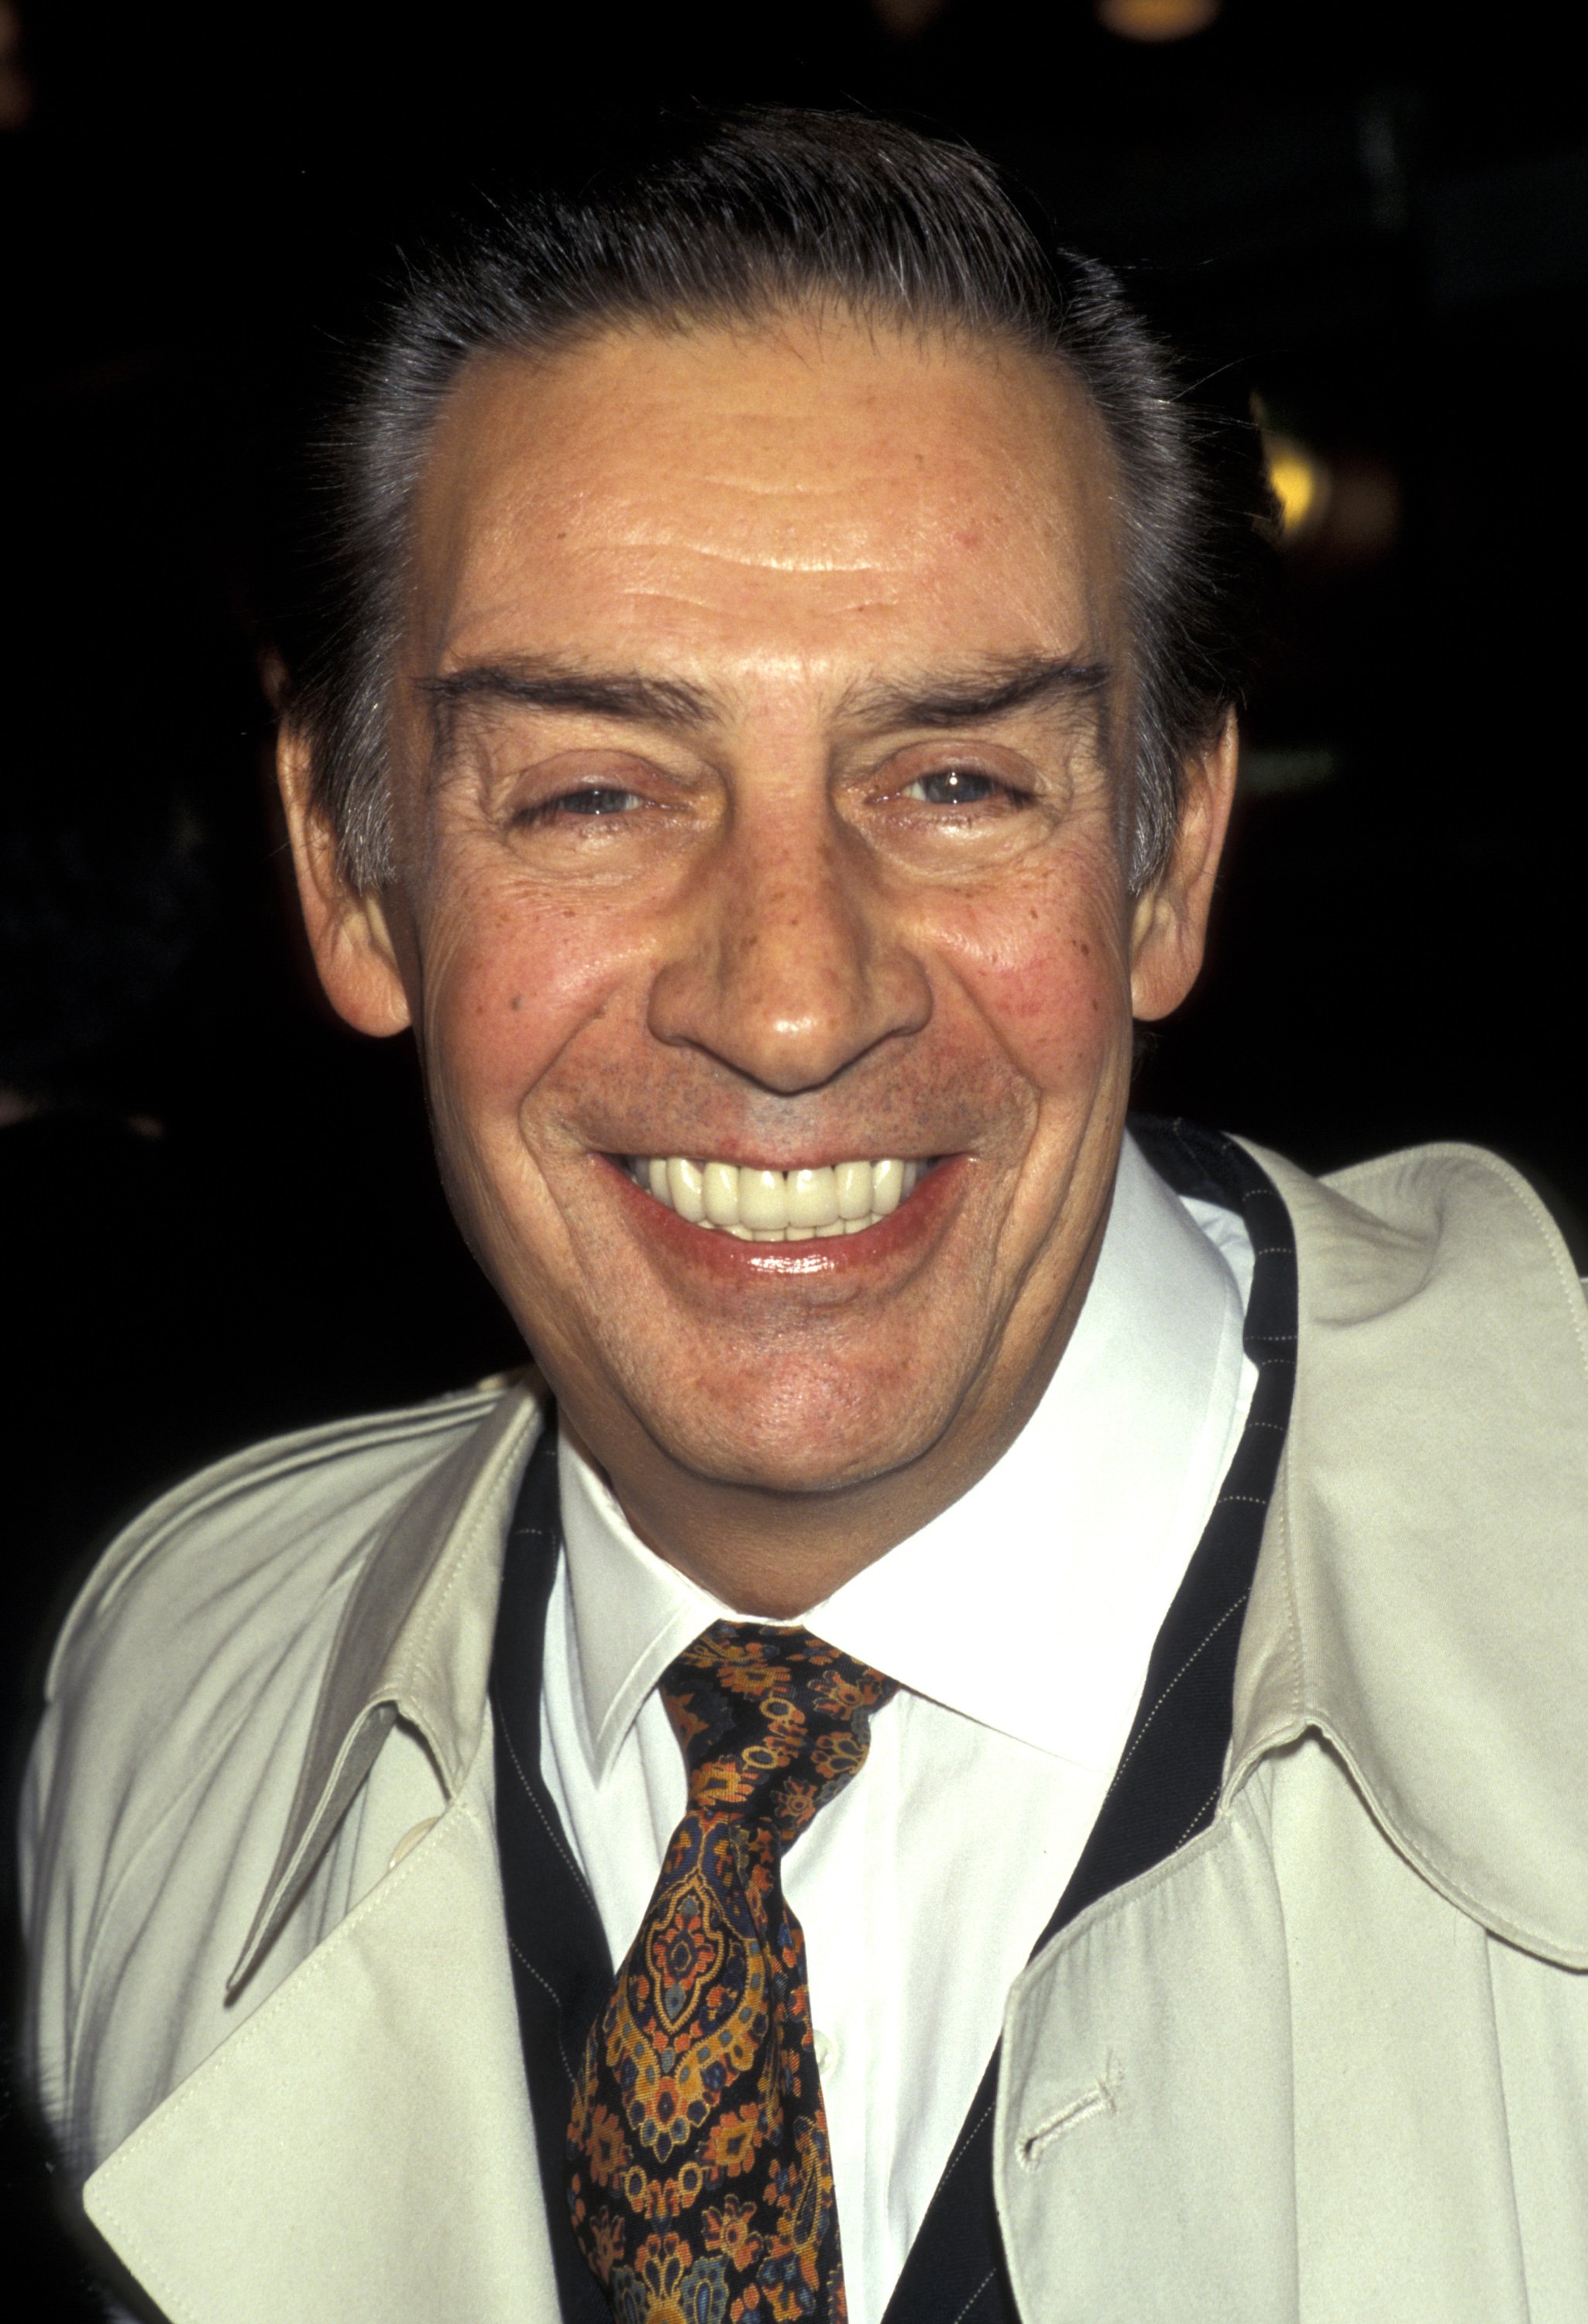 Jerry Orbach during the "Chicago" Broadway Opening Night in New York City, on November 14, 1996 | Source: Getty Images